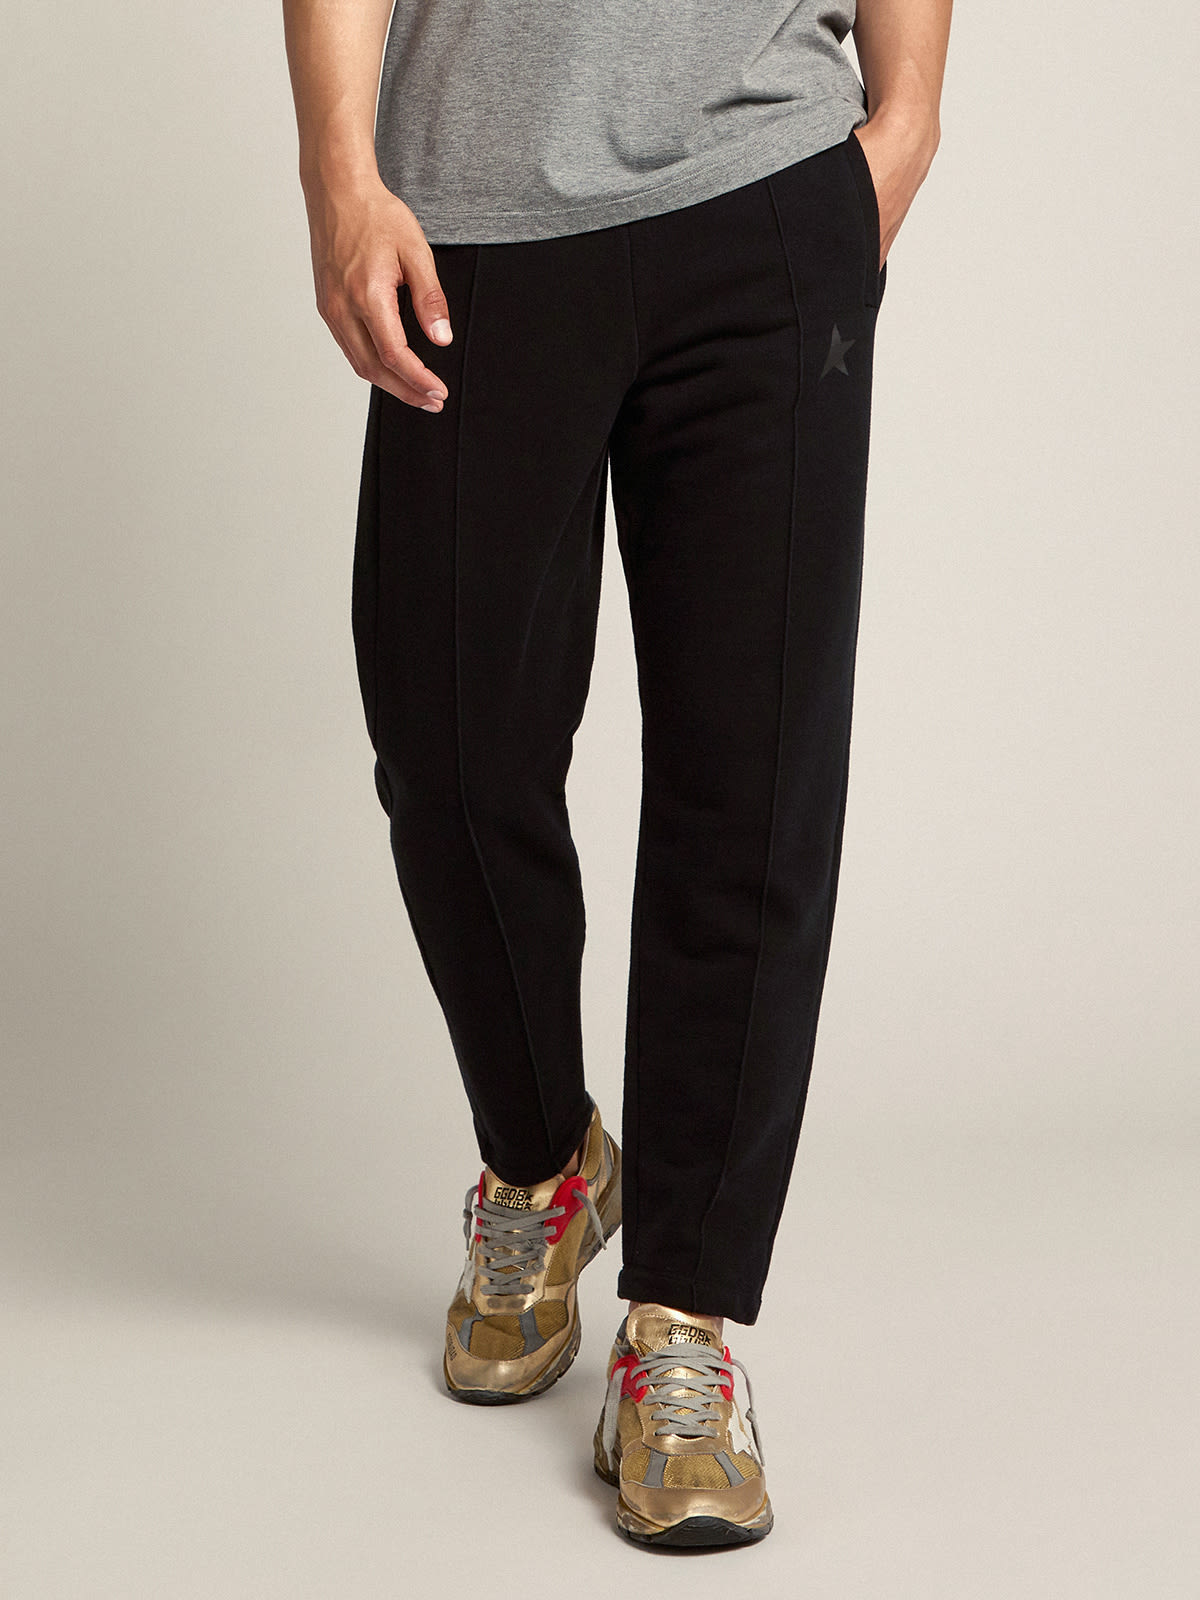 Golden Goose - Men's black joggers with star on the front in 